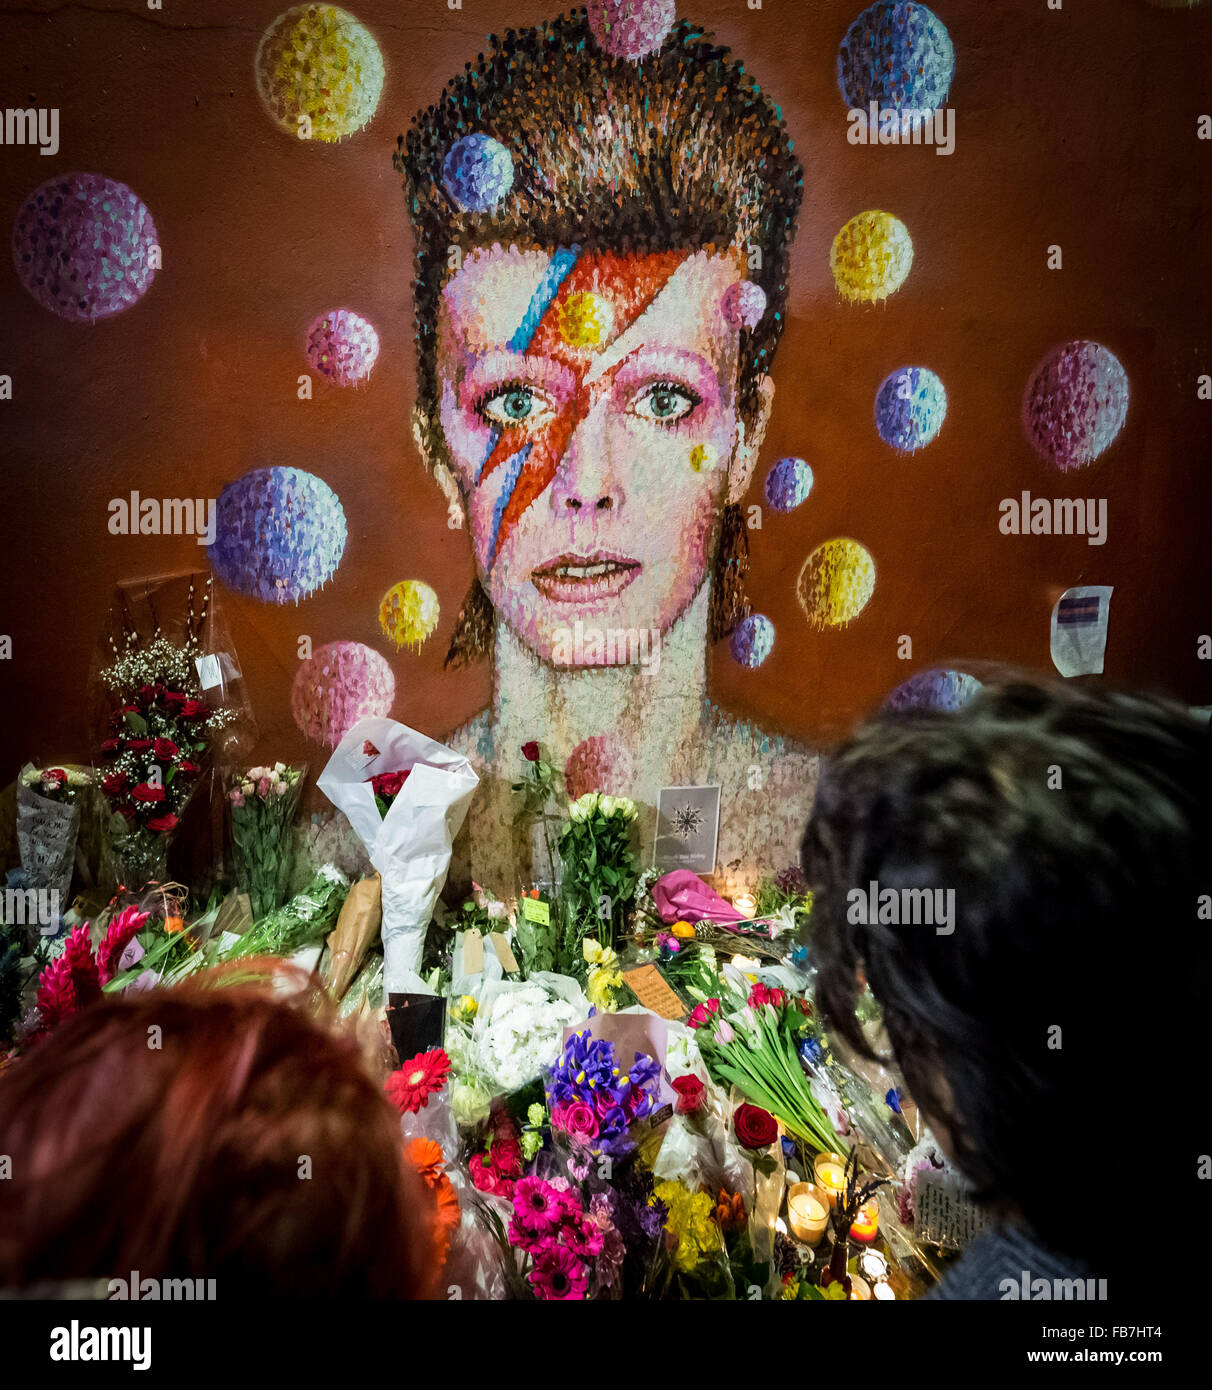 London, UK. 11th January, 2016. Fans gather at the David Bowie mural in Brixton, south London for an evening remembrance vigil, to lay flowers and leave messages. David Bowie (1947-2016) who passed away on 10 January 2016 Credit:  Guy Corbishley/Alamy Live News Stock Photo